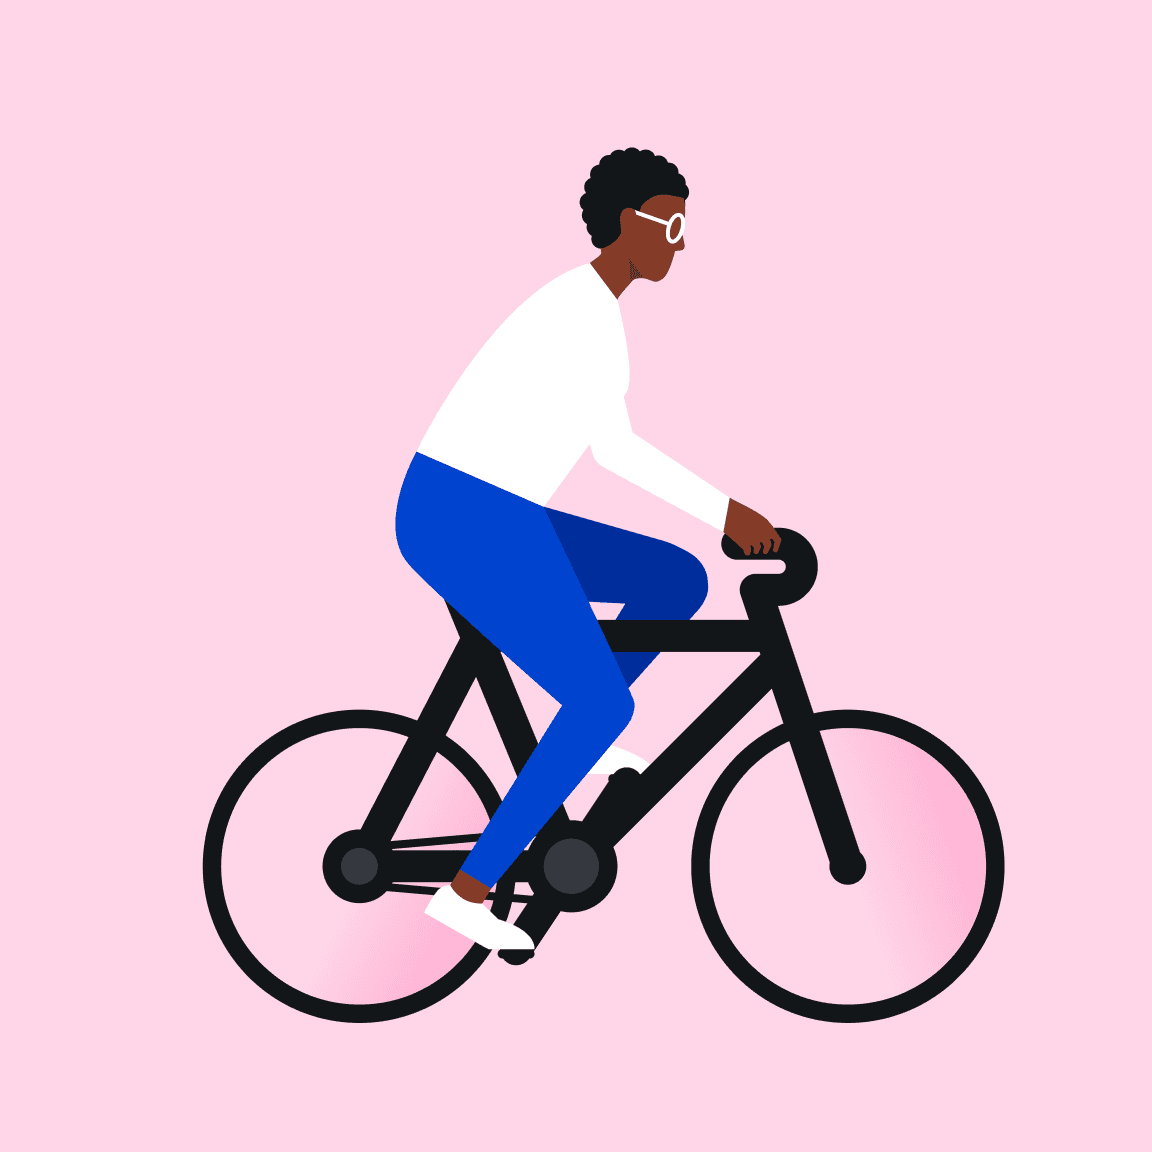 flat-style illustration of person riding bicycle